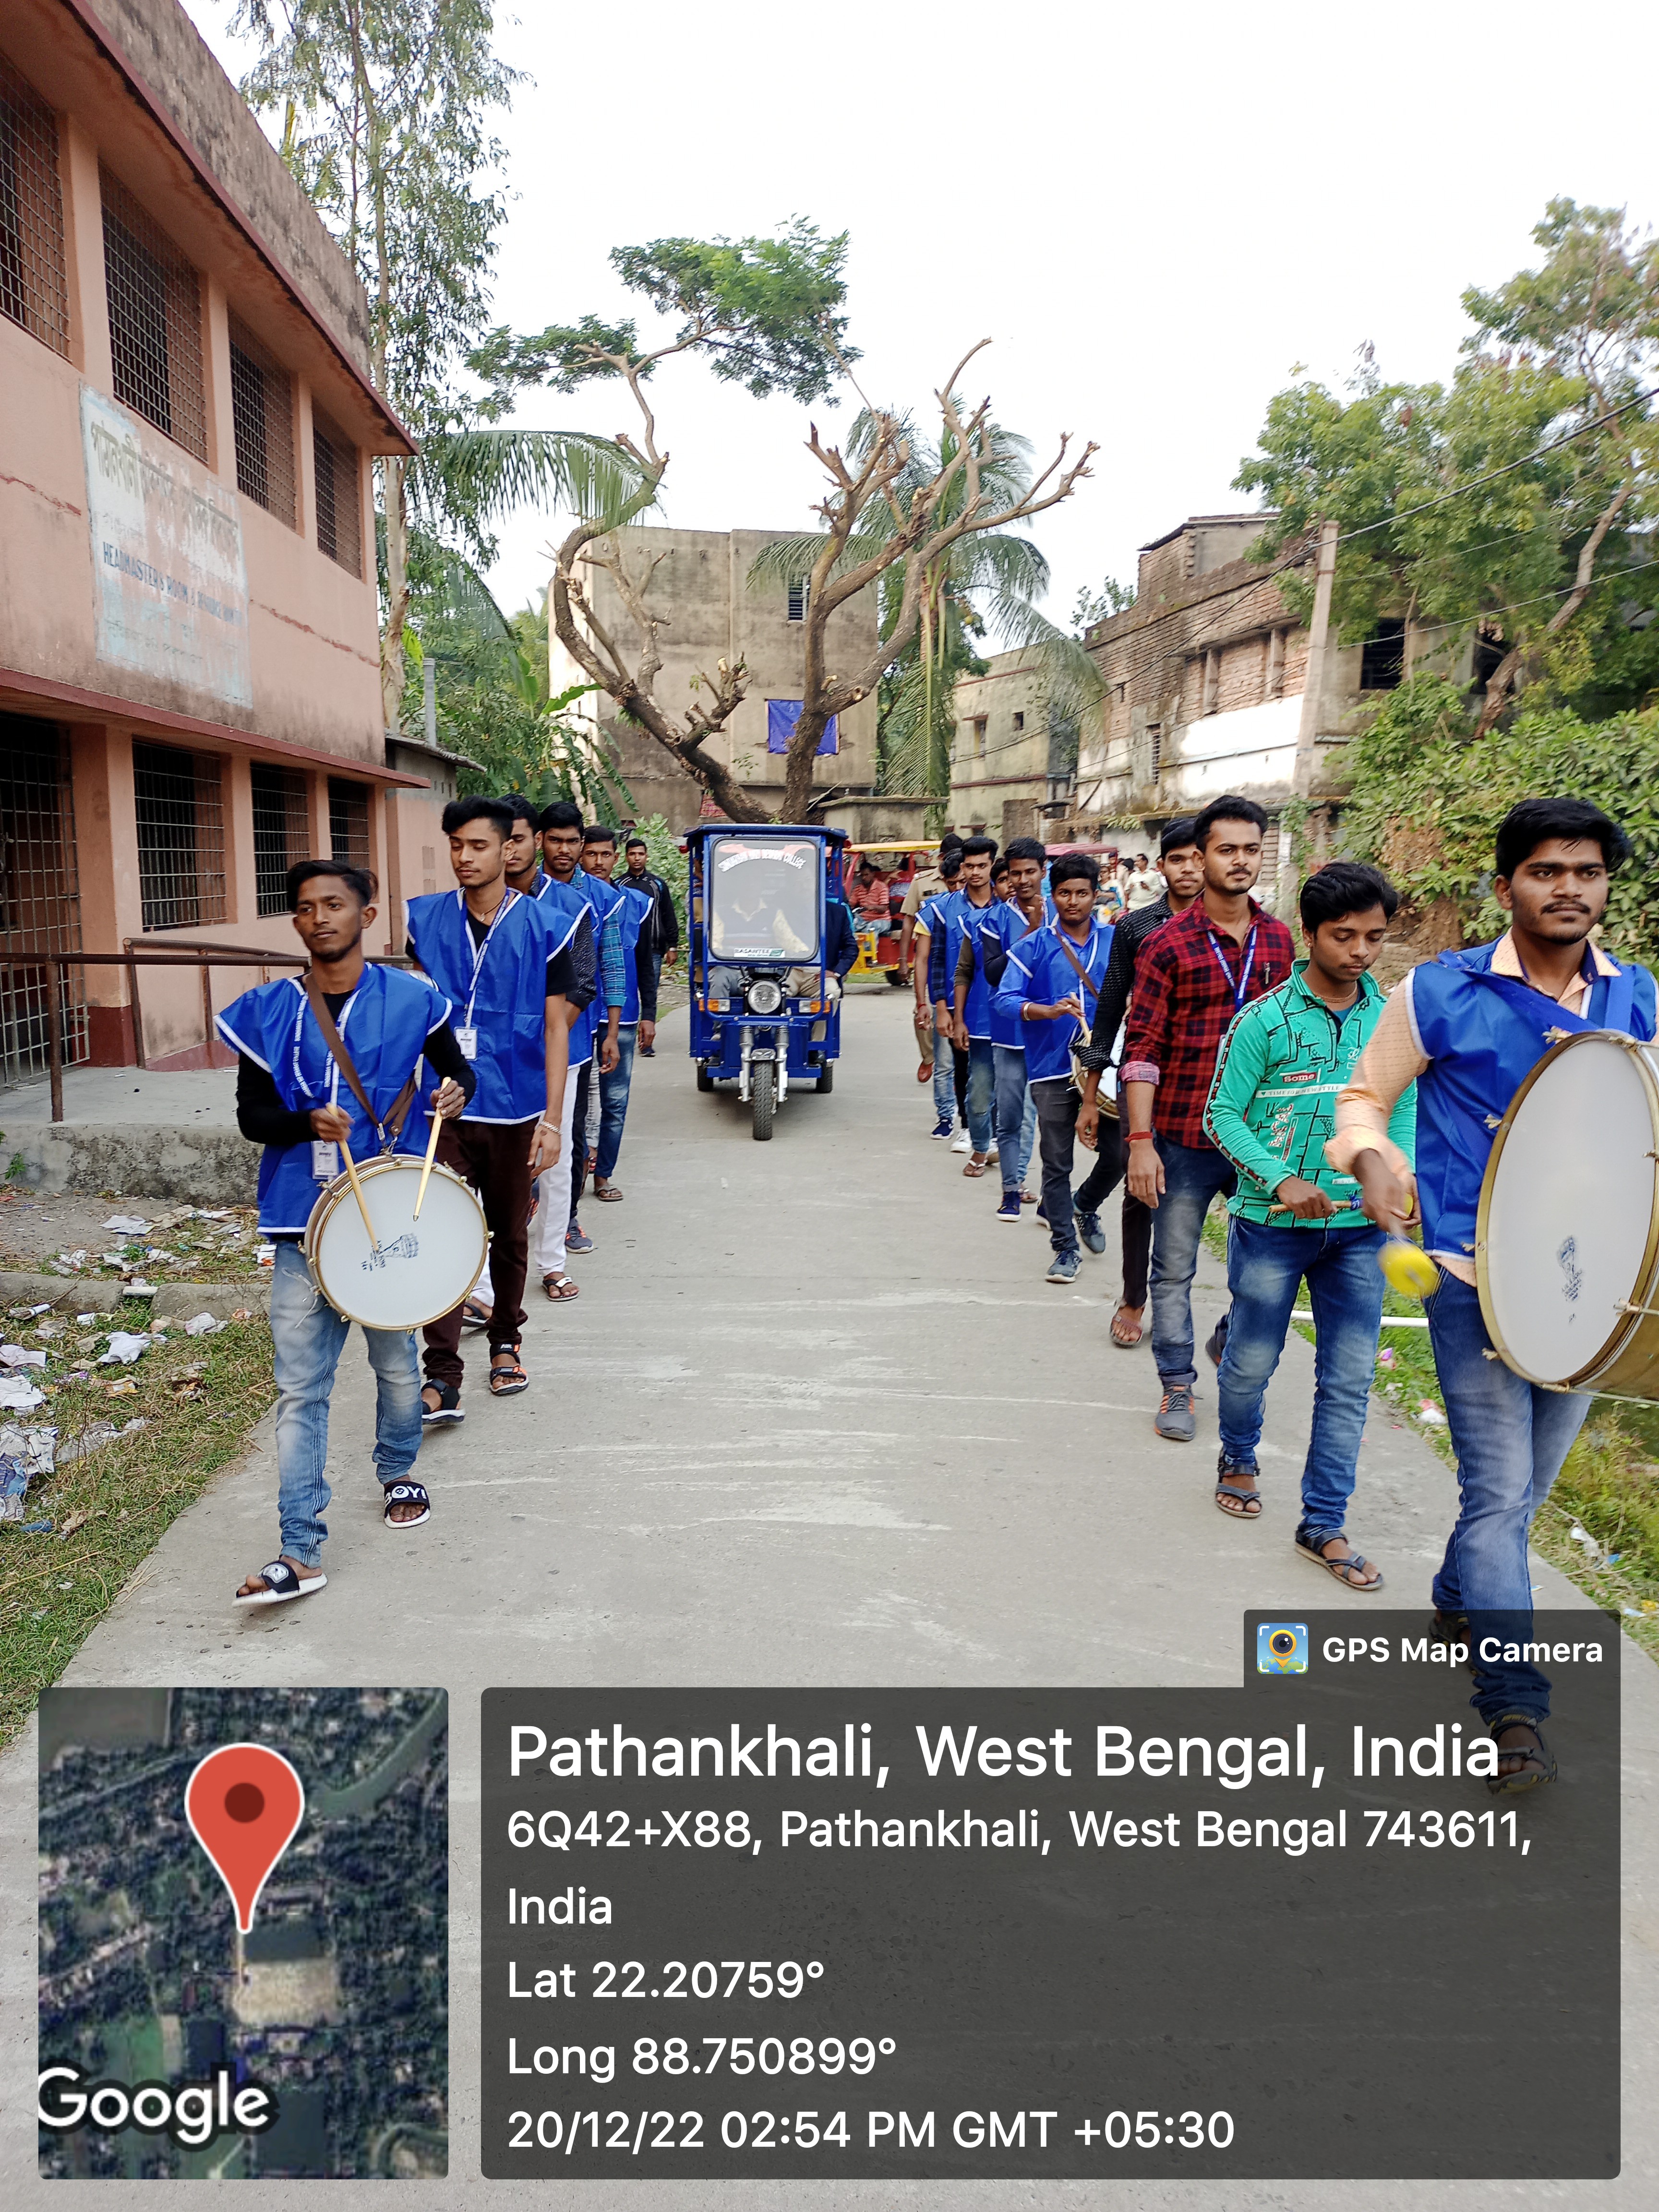 NSS Volunteers' drill to welcome members of the Standing Committee on Higher Education, West Bengal Legislative Assembly